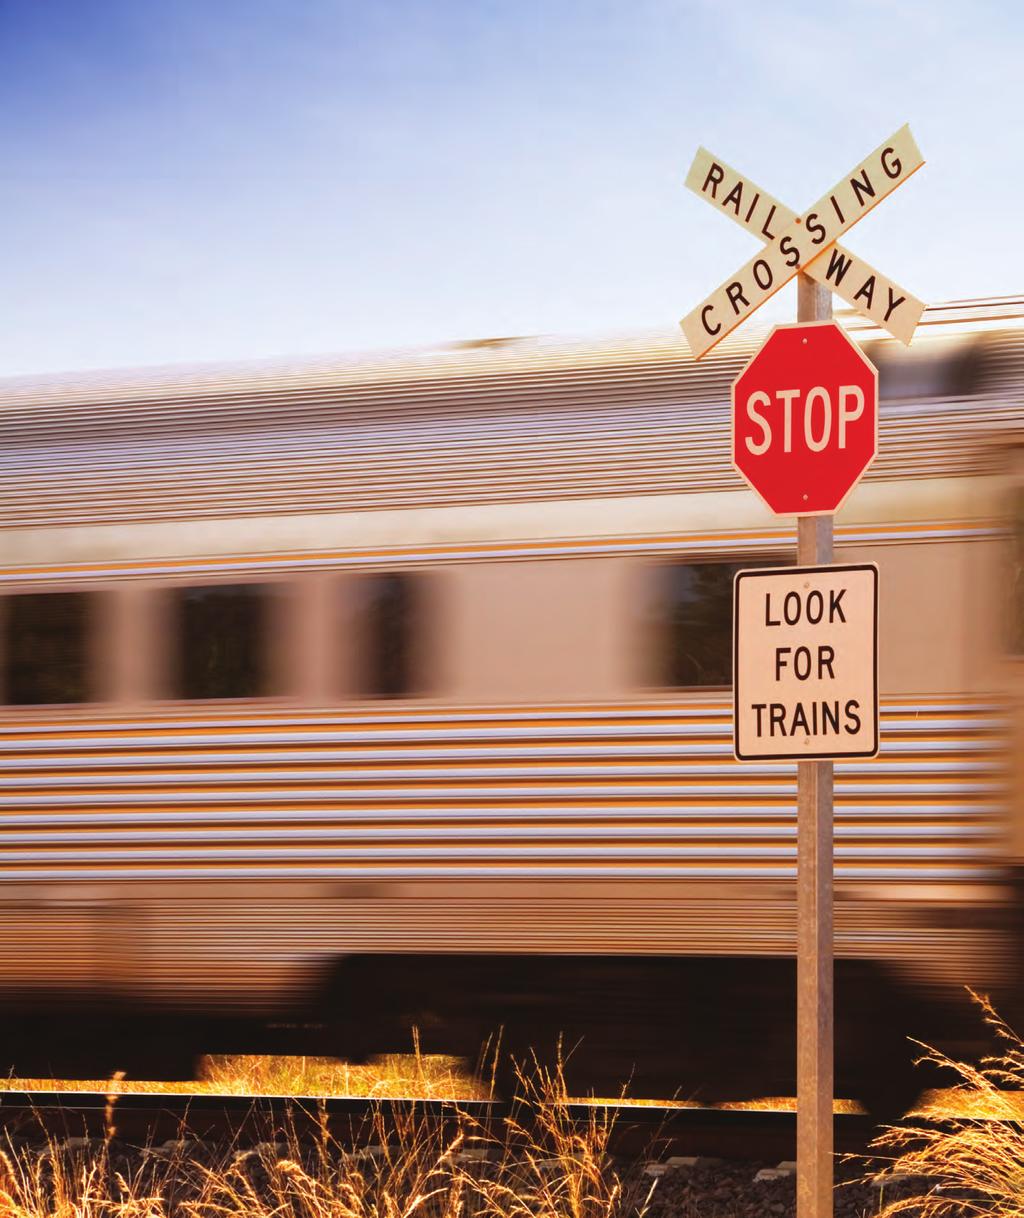 Motorists can fail to see approaching trains despite their imposing size. They may also be fooled by the illusion that the train is farther away and moving slower than it really is.